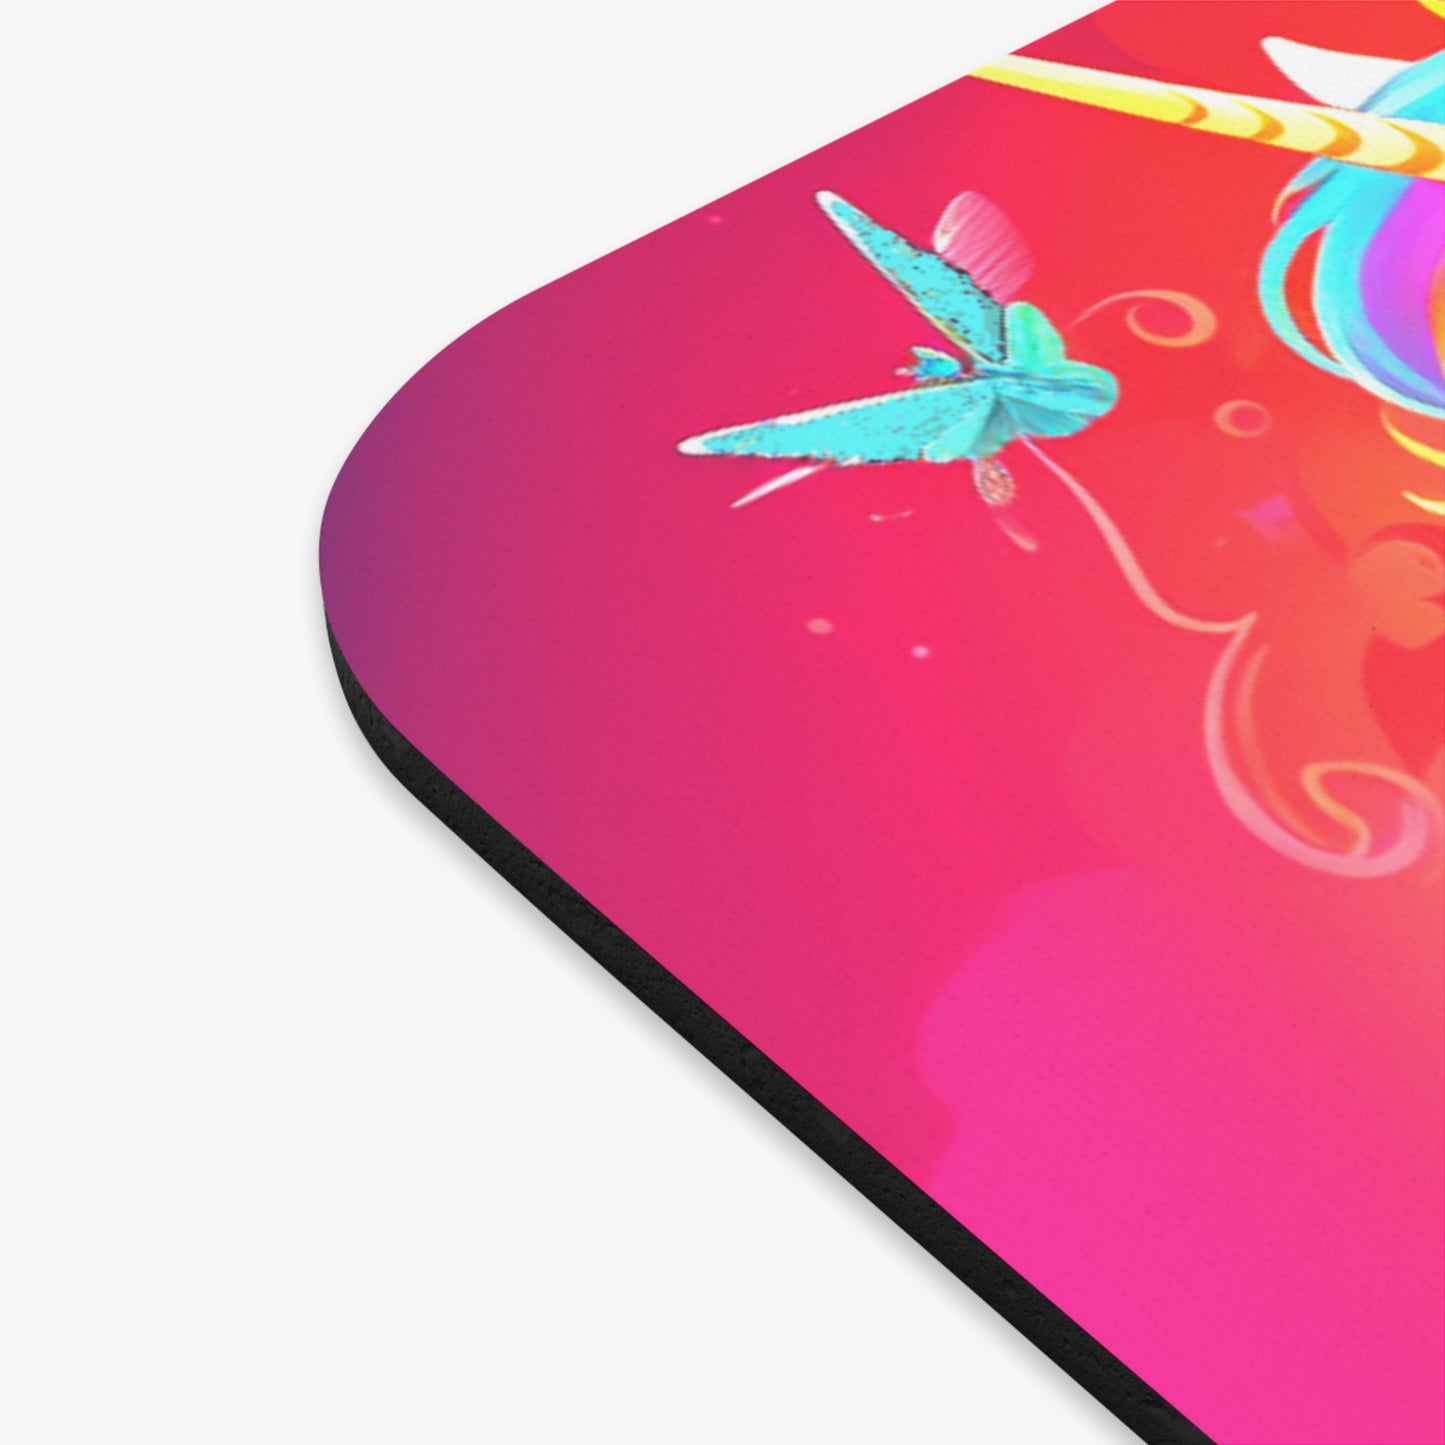 Rainbow Unicorn Mouse Pad From Big Fairy Tales By Schatar